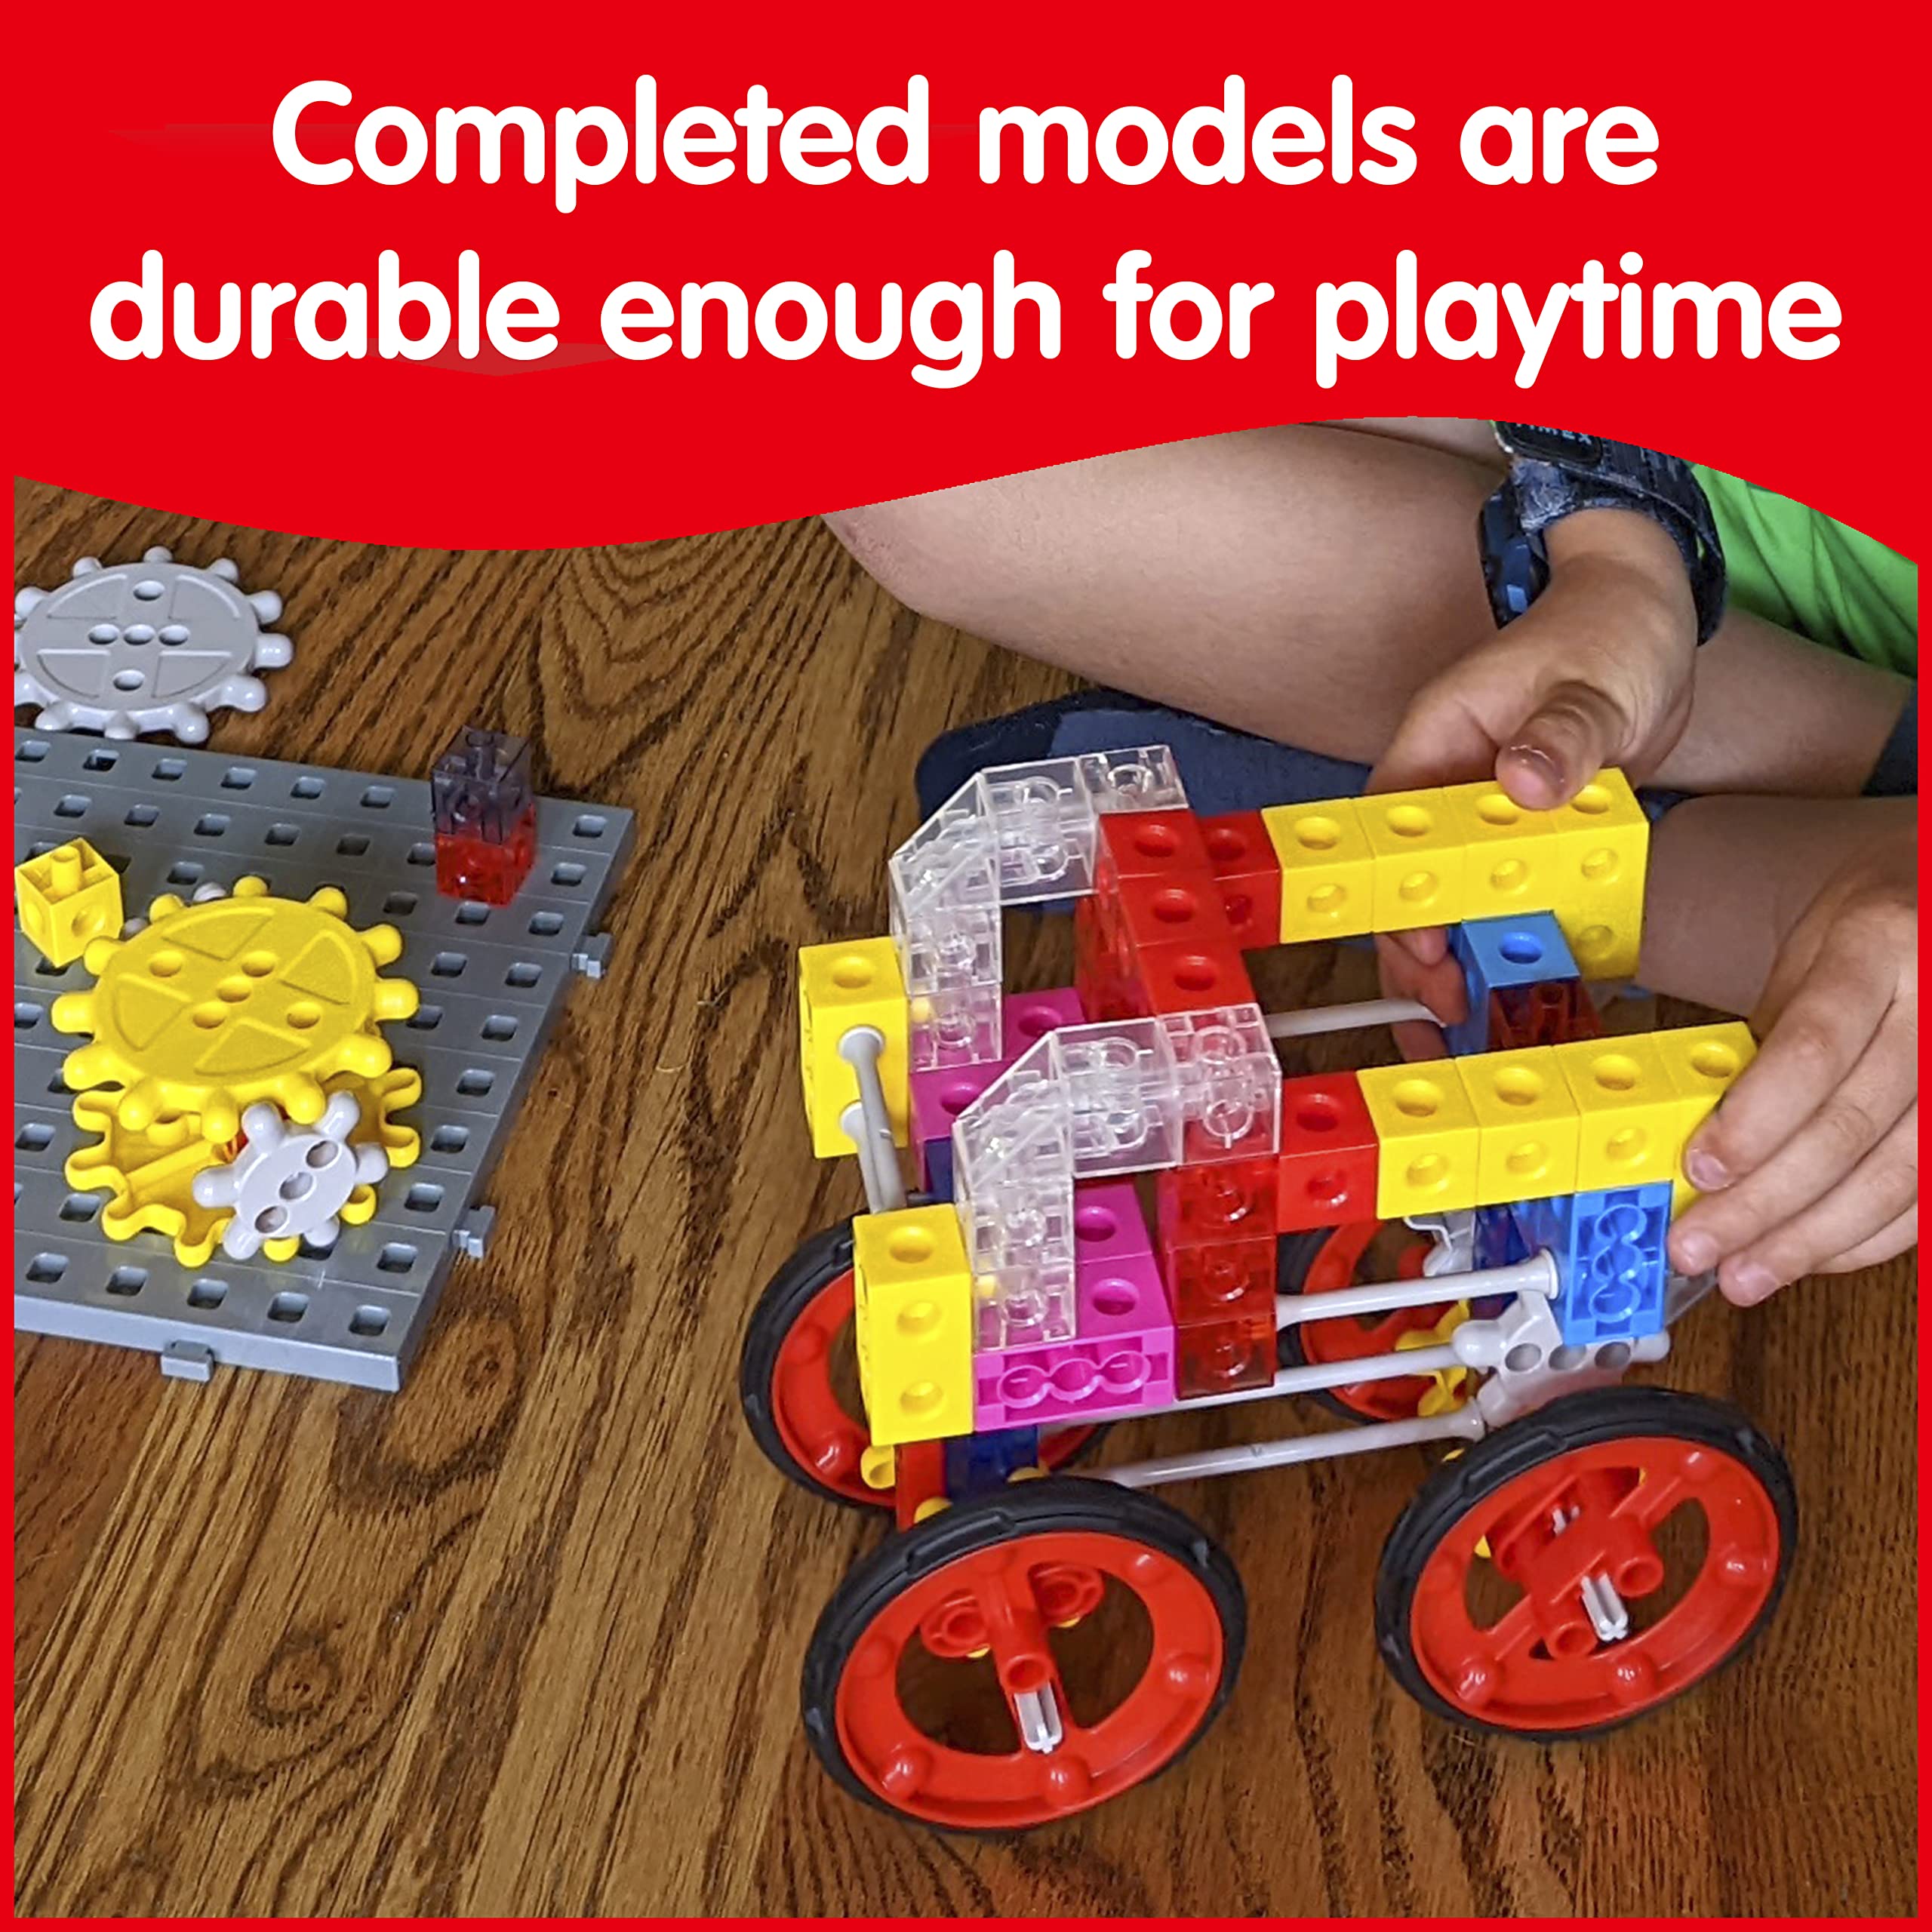 edxeducation My Gears Junior Set - 117 Pieces - 13 Activities - Gears Toys for Kids - Build Rotating, Moving Models - Building Toys for Kids Ages 4-8